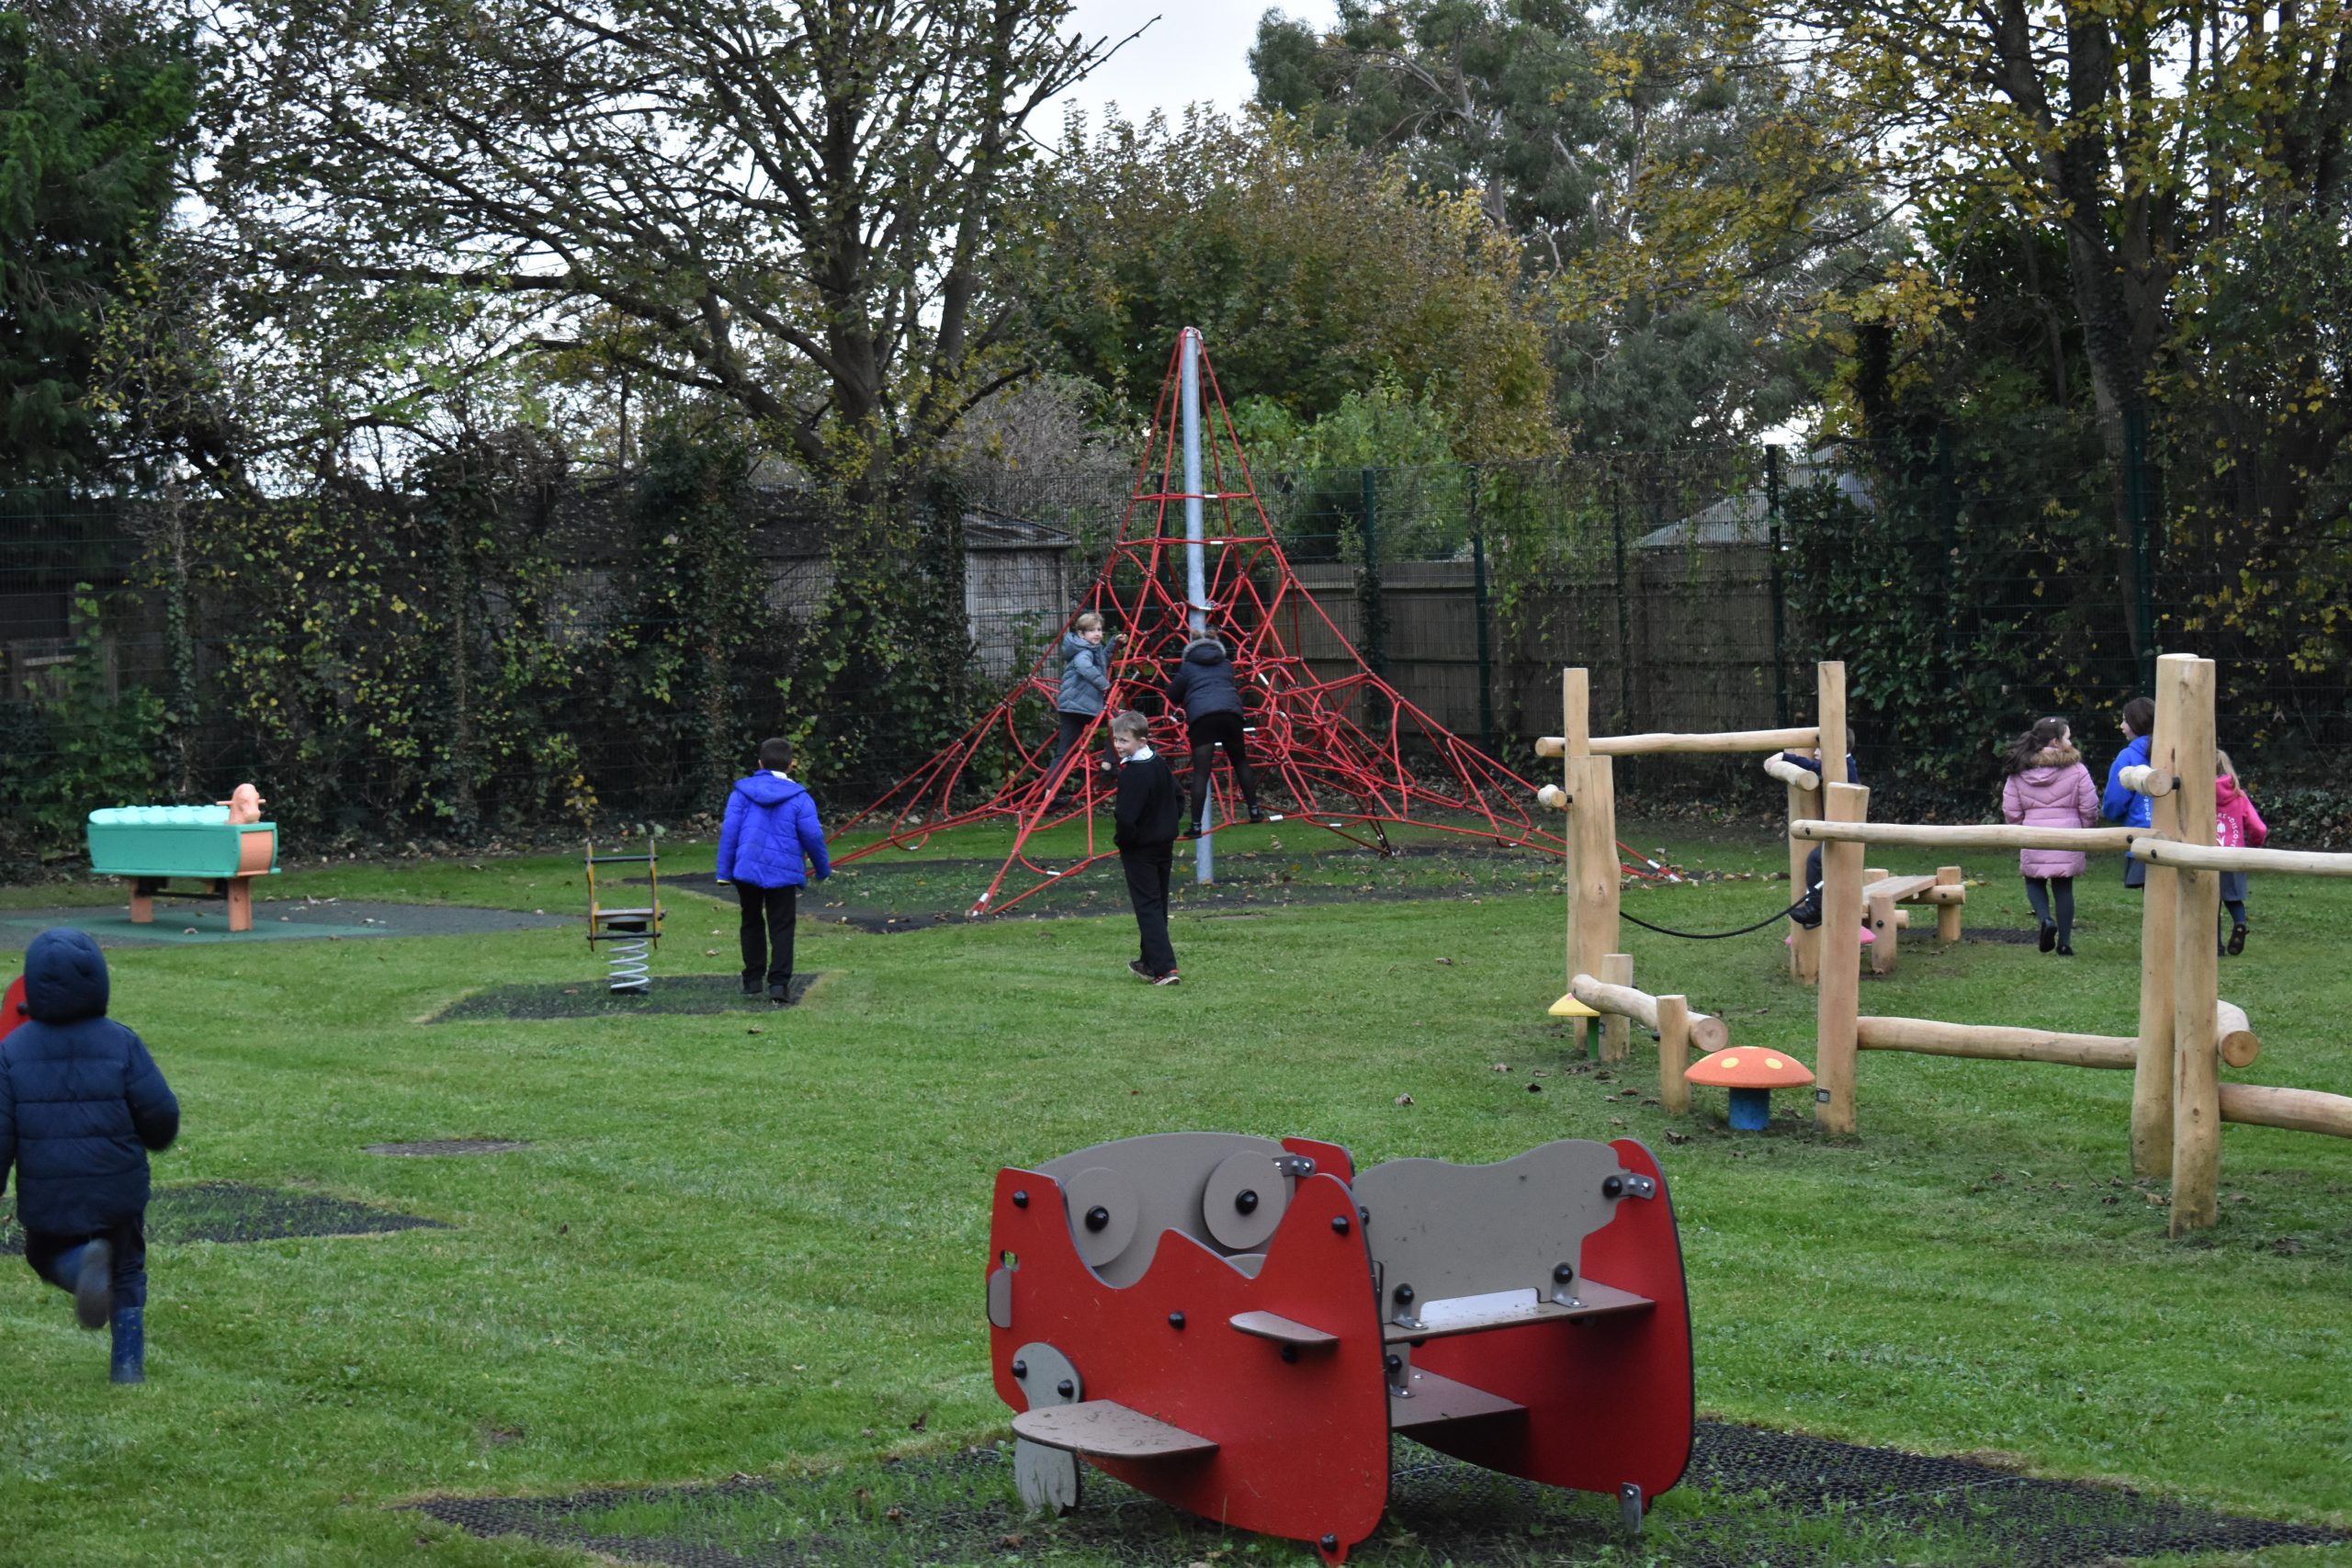 Children using the play equipment in the new park